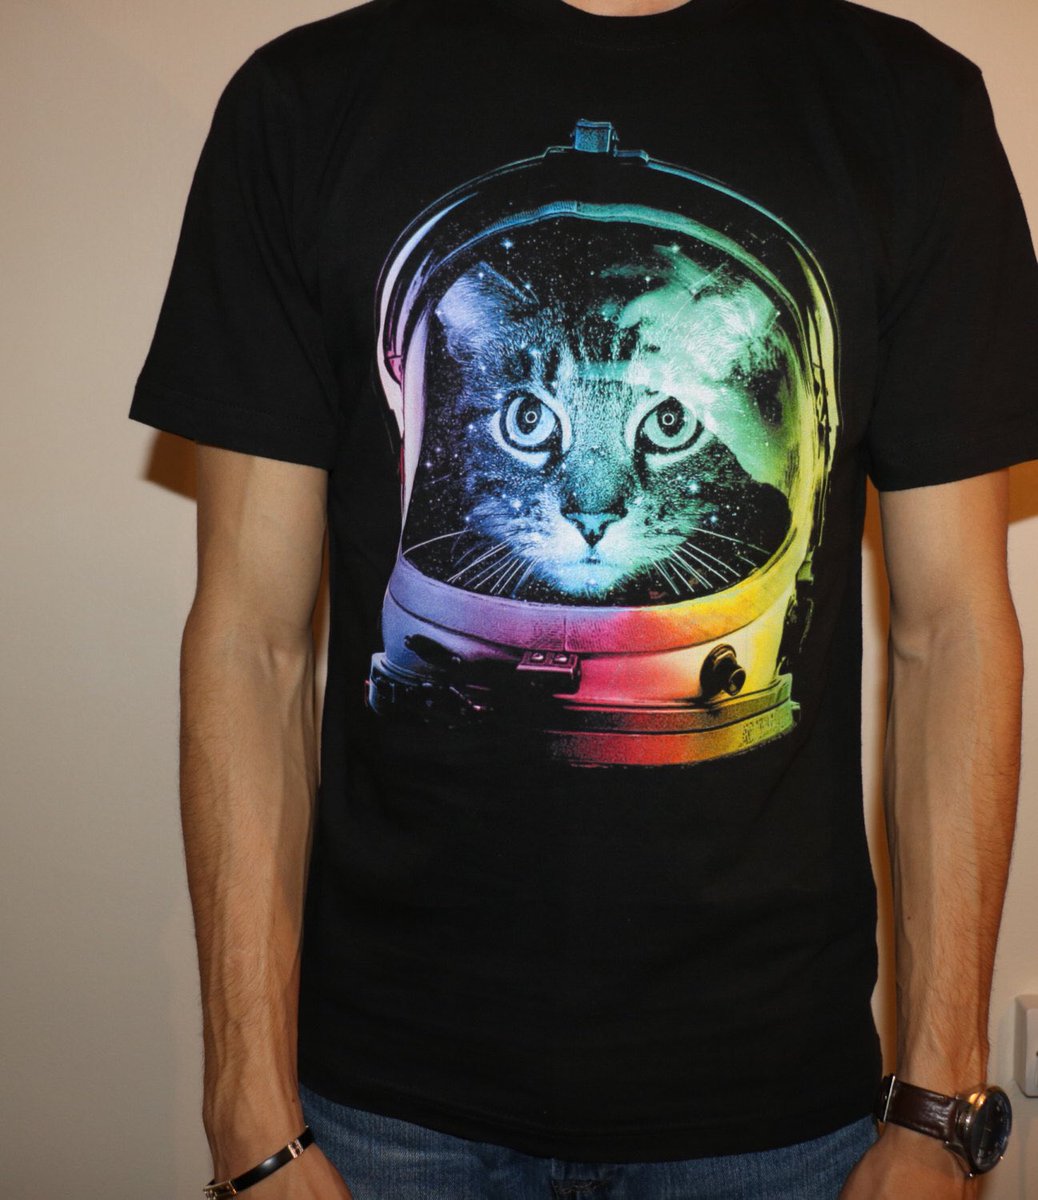 RETRO SYNTH SYNTHESIZER OCTAVE THE CAT T SHIRT DESIGN S M L XL XXL